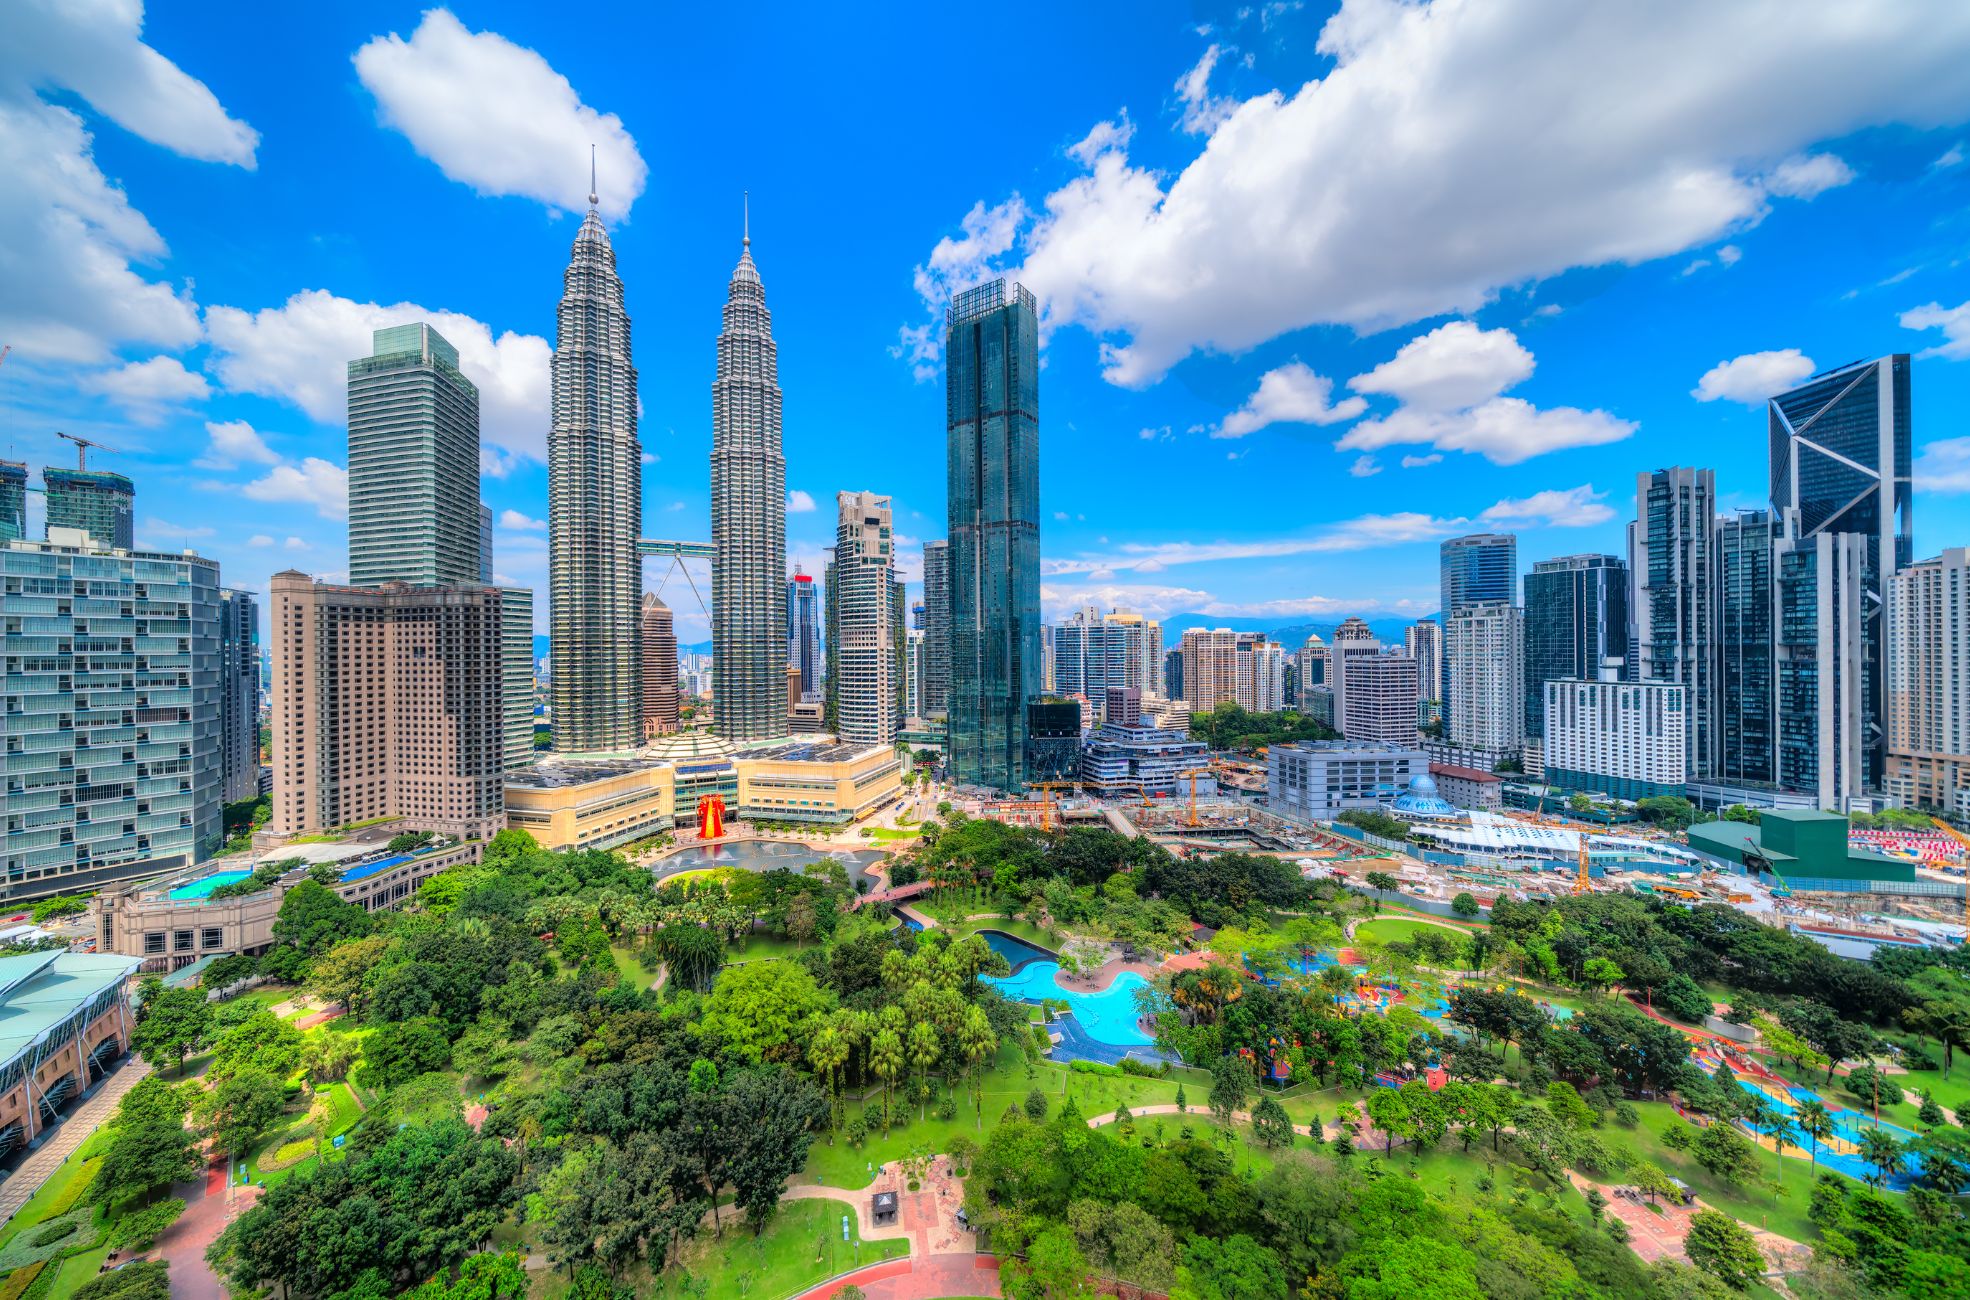 Cityscape And Park In Malaysia